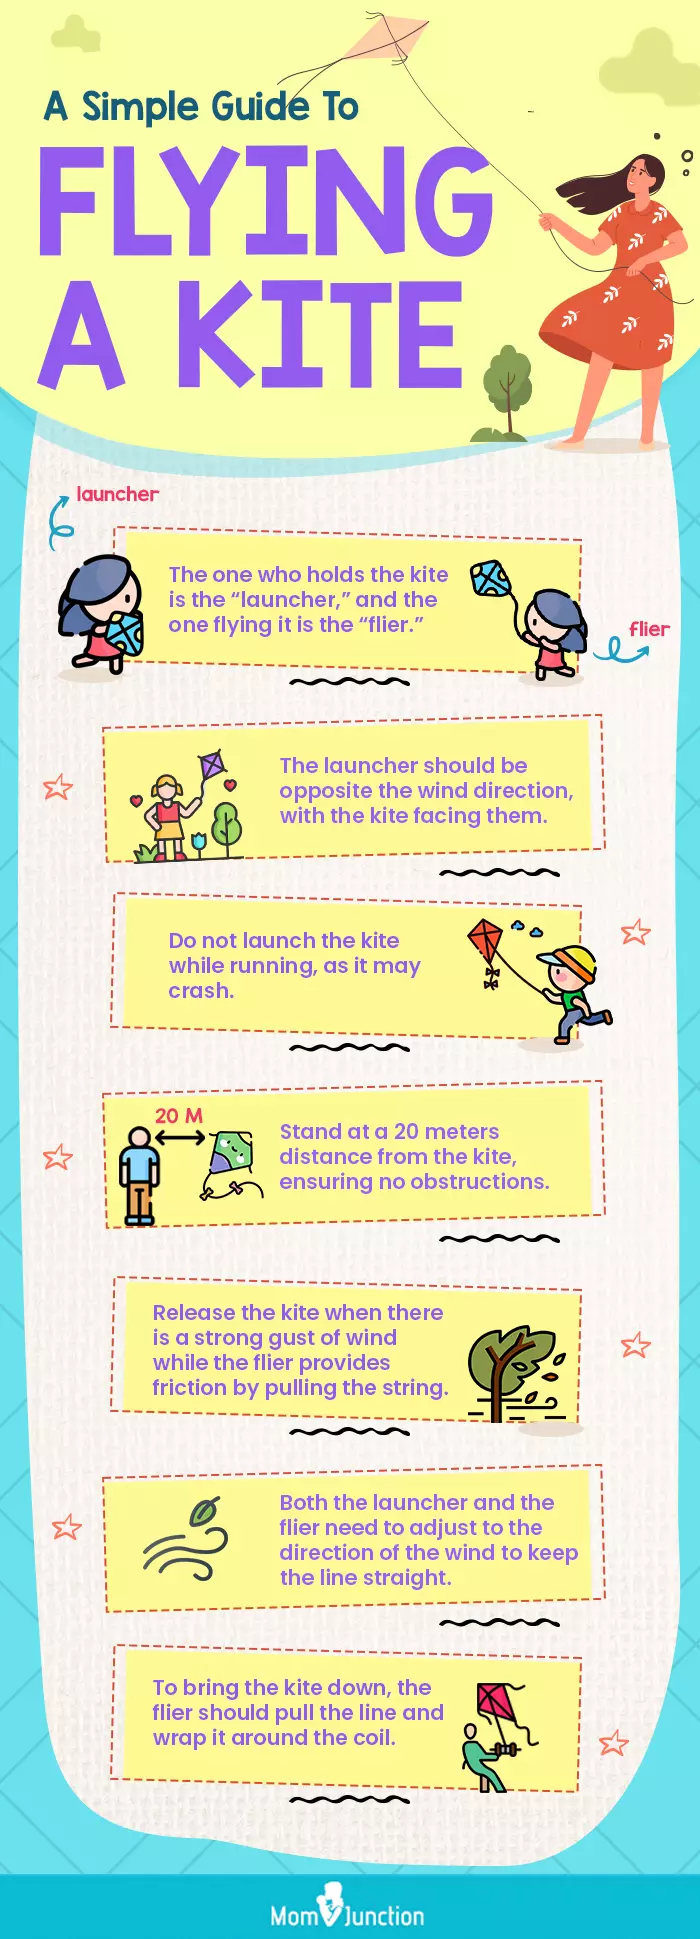 a simple guide to flying a kite (infographic)